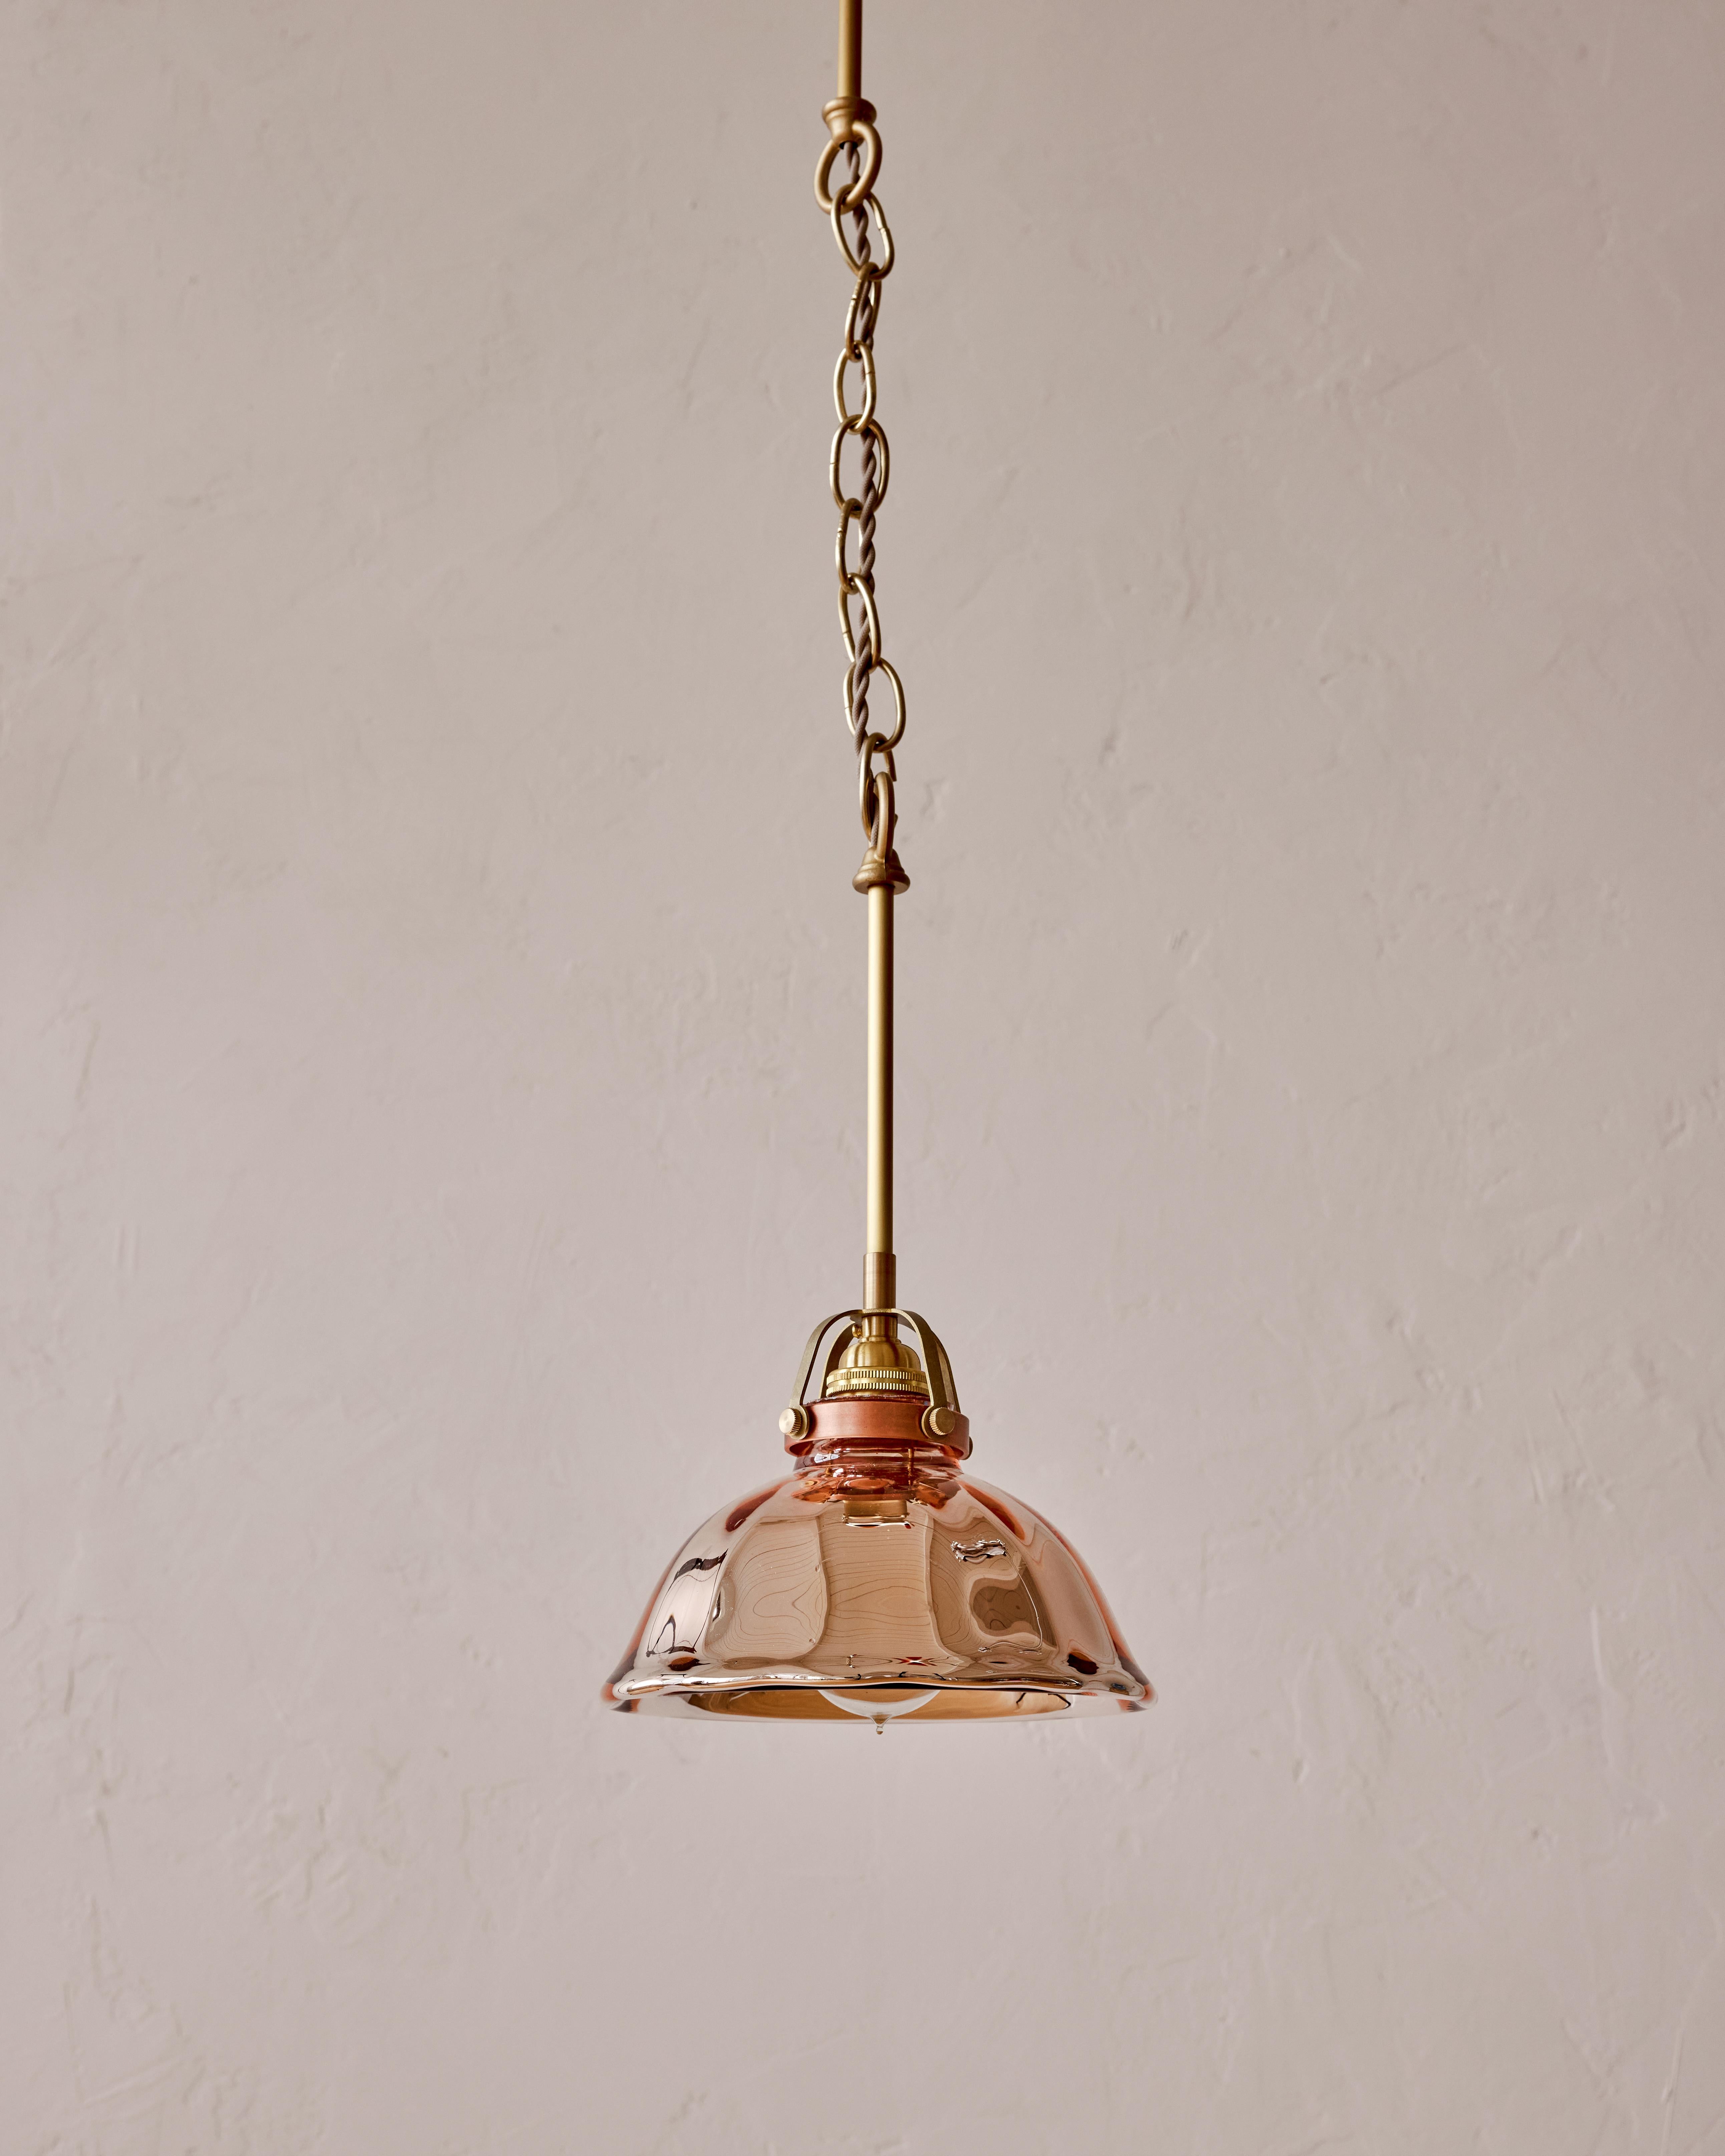 Our beautiful, limited edition rose pendant light is ready to illuminate your home with its soft warm light. The pink glass shade is 'mercury' silvered glass. This glass is blown double walled, then silvered between with a liquid silvering solution,